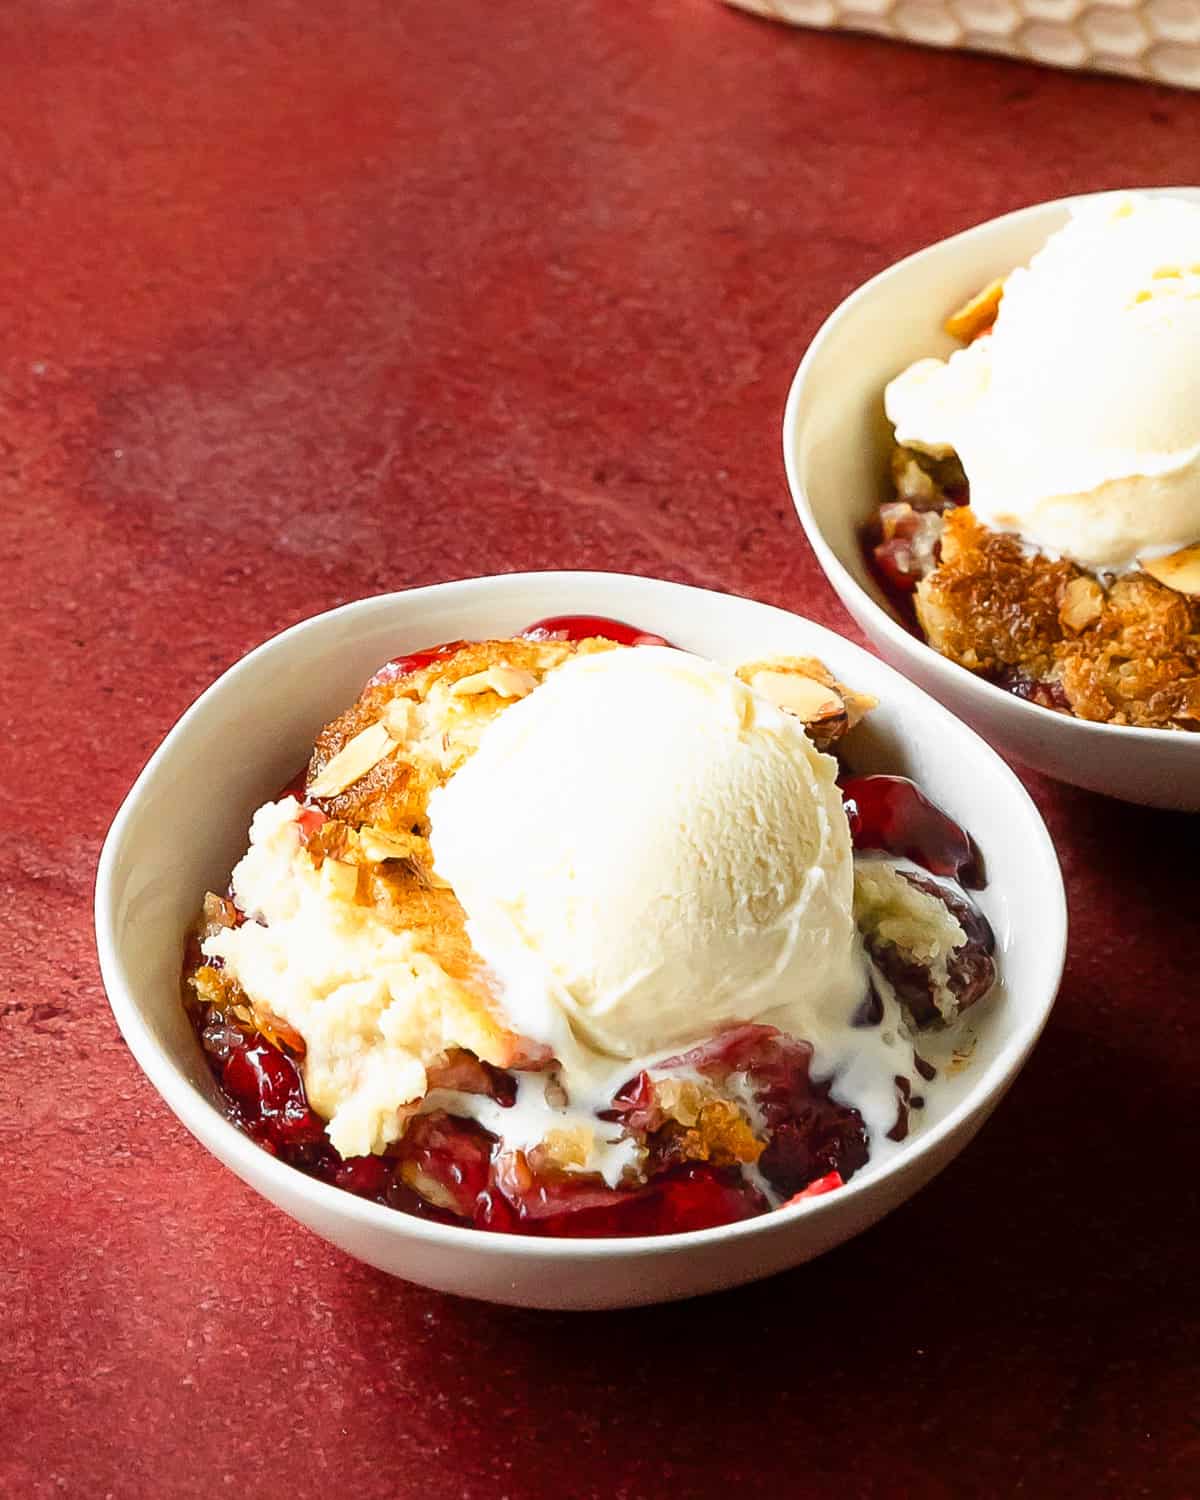 Cherry dump cake is an easy to make cherry cobbler with cake mix dessert. This recipe for cherry dump cake comes together quickly with pantry basics such as cake mix, cherry pie filling, canned or fresh cherries and butter. Top this cherry cobbler dump cake with vanilla ice cream for the perfect easy baked dessert. 